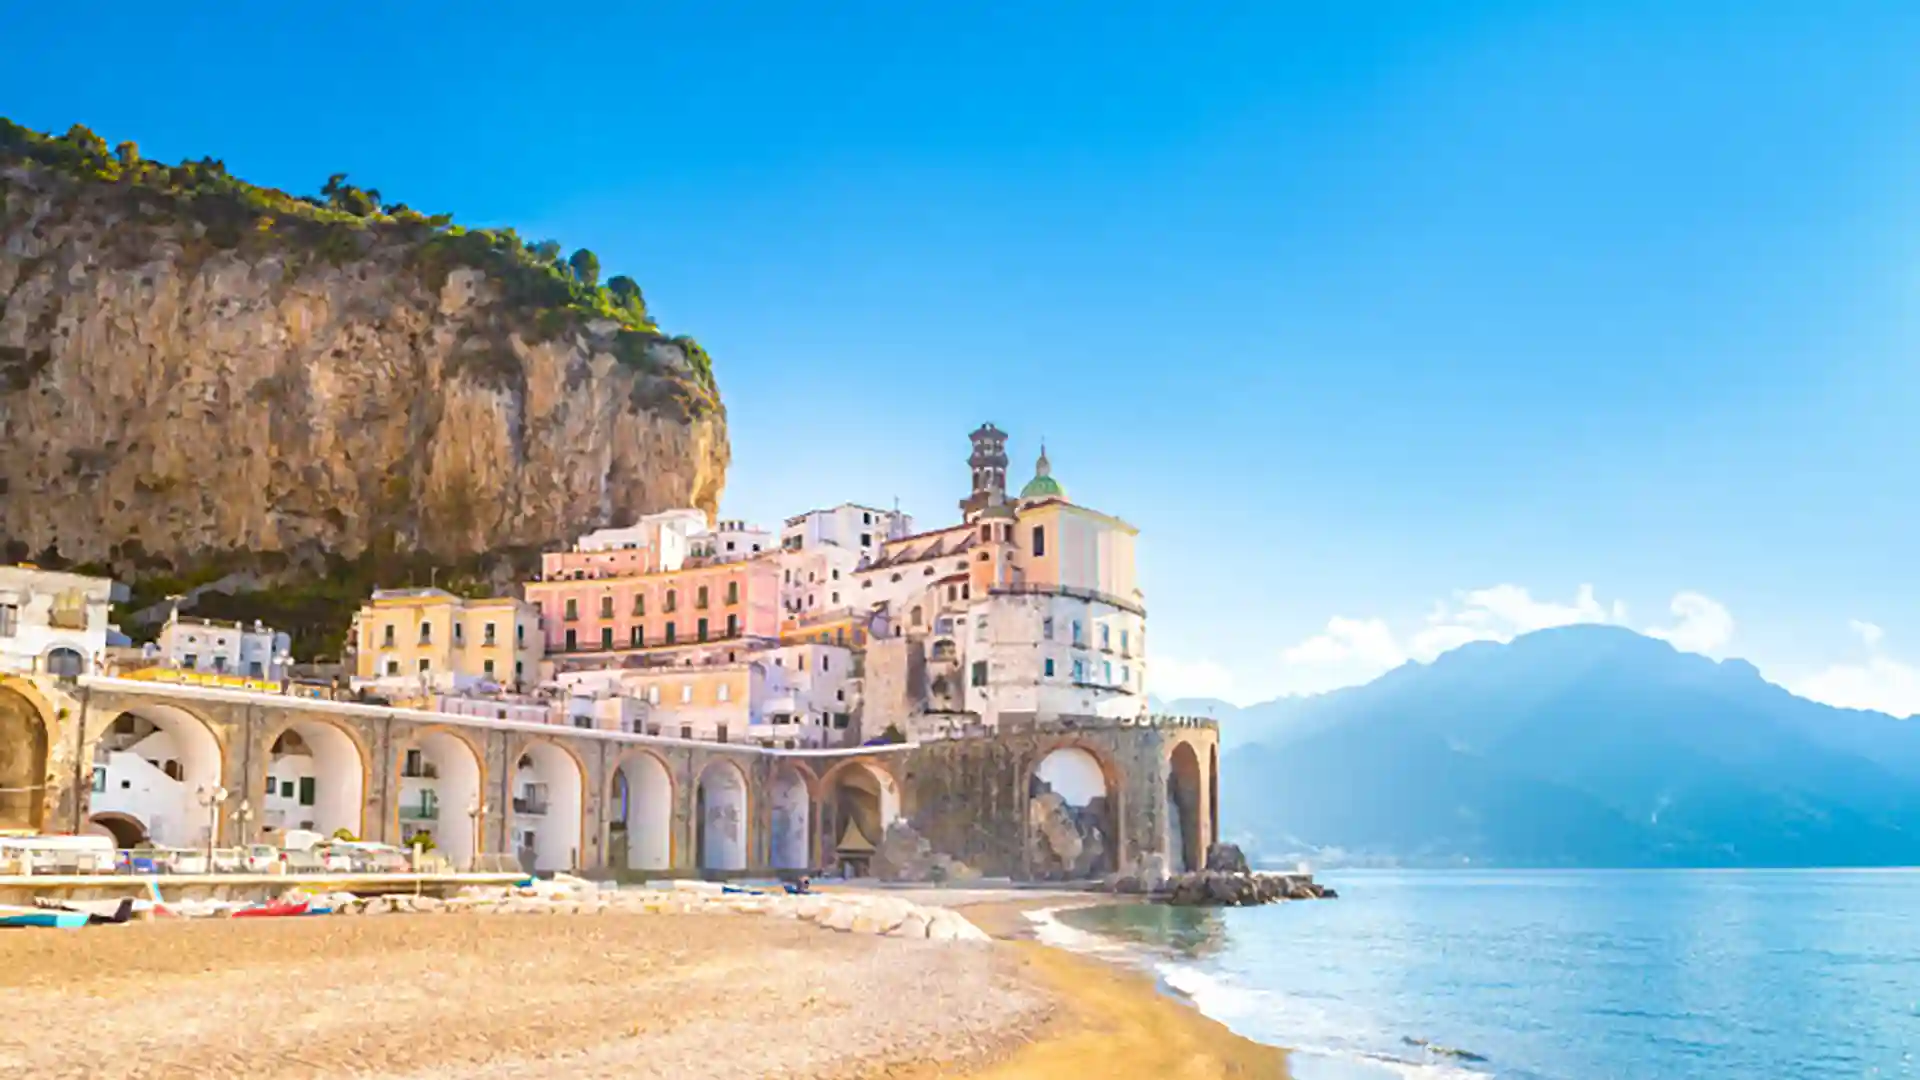 View of a sandy shore along the Amalfi Coast in Italy with buildings and lush landscapes in the background.